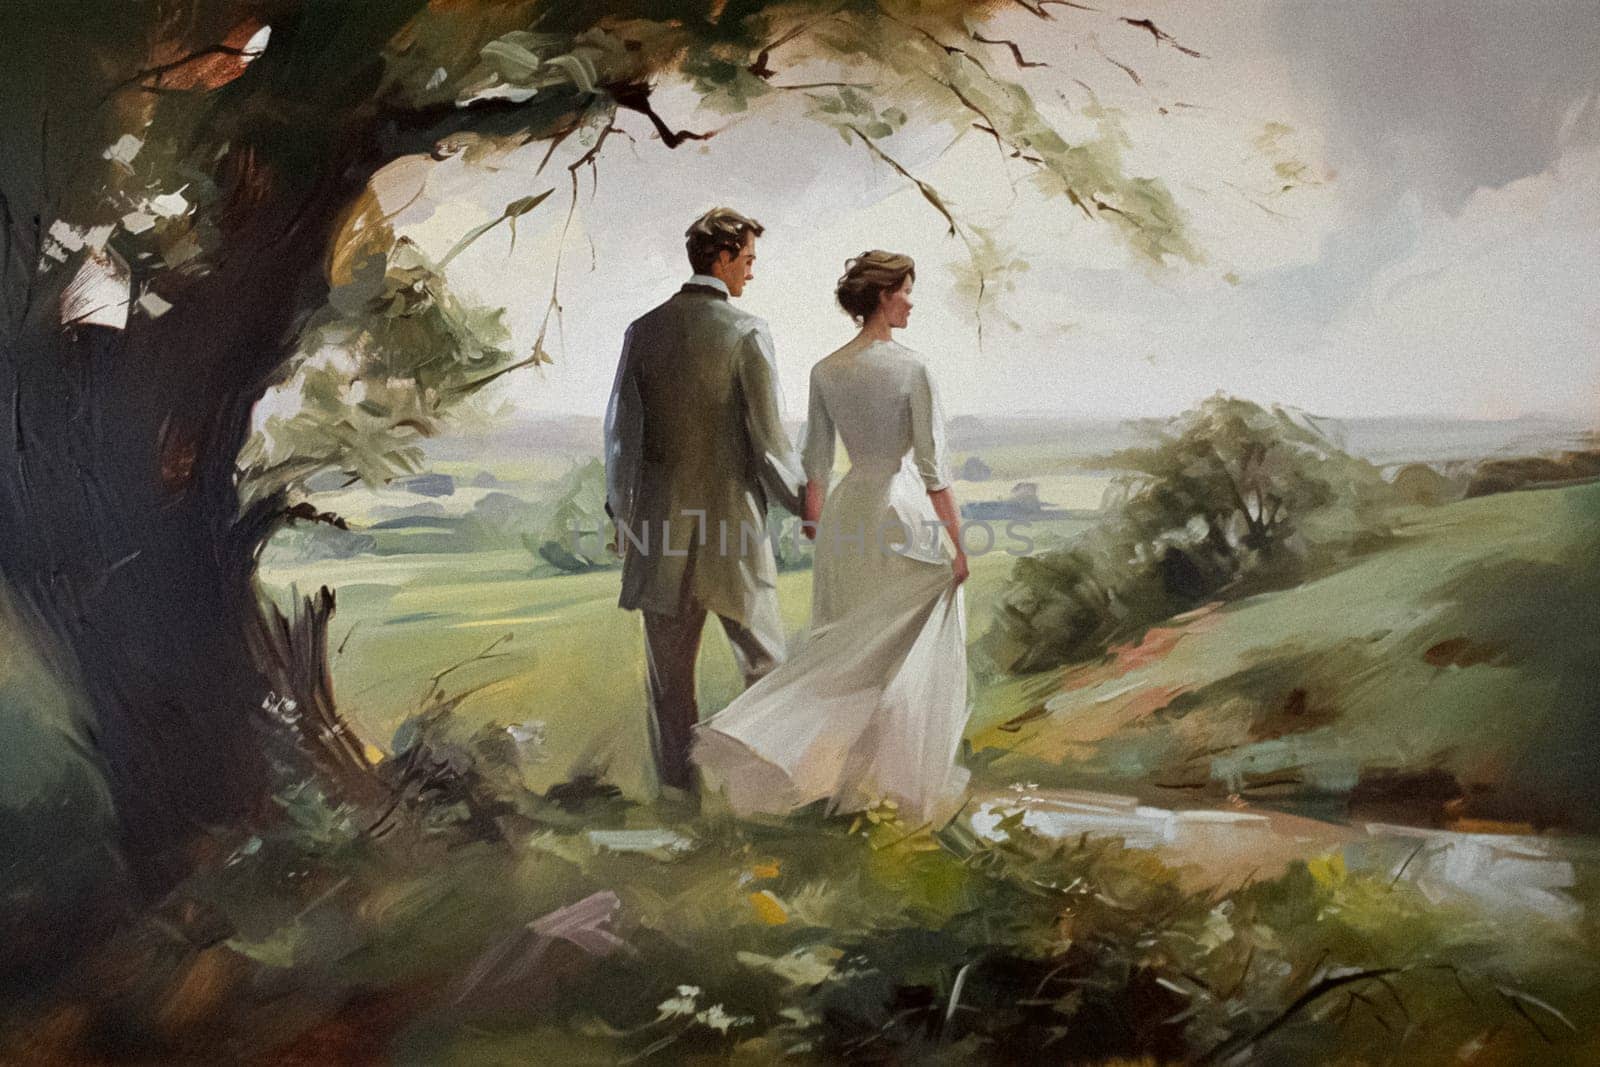 Oil style fine art painting of romantic vintage couple in the English countryside, country nature in soft pastel colours, evoking a sense of love and natural beauty, printable art design